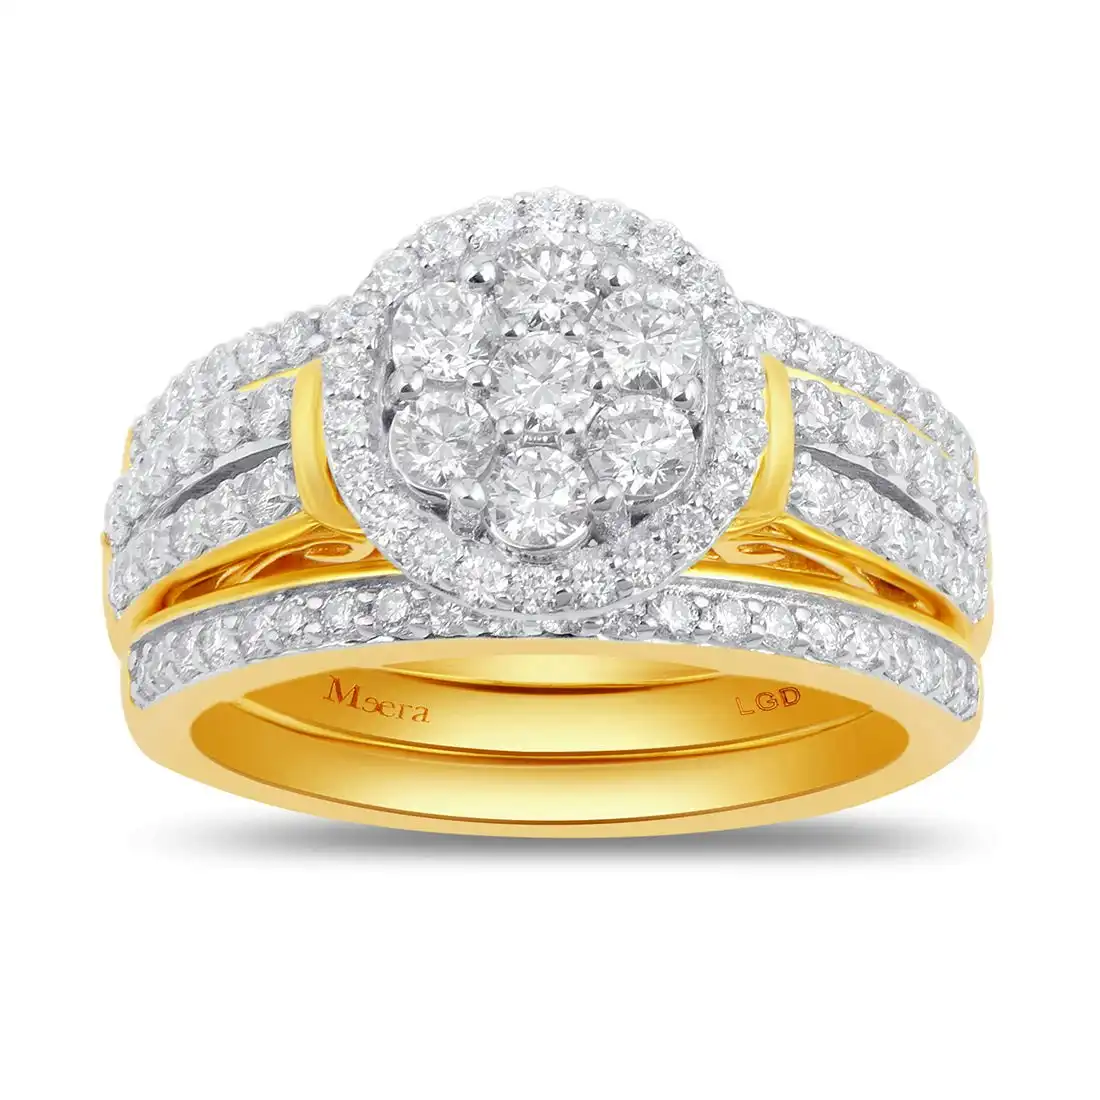 Meera Triple Ring with 1.25ct of Laboratory Grown Diamonds in 9ct Yellow Gold